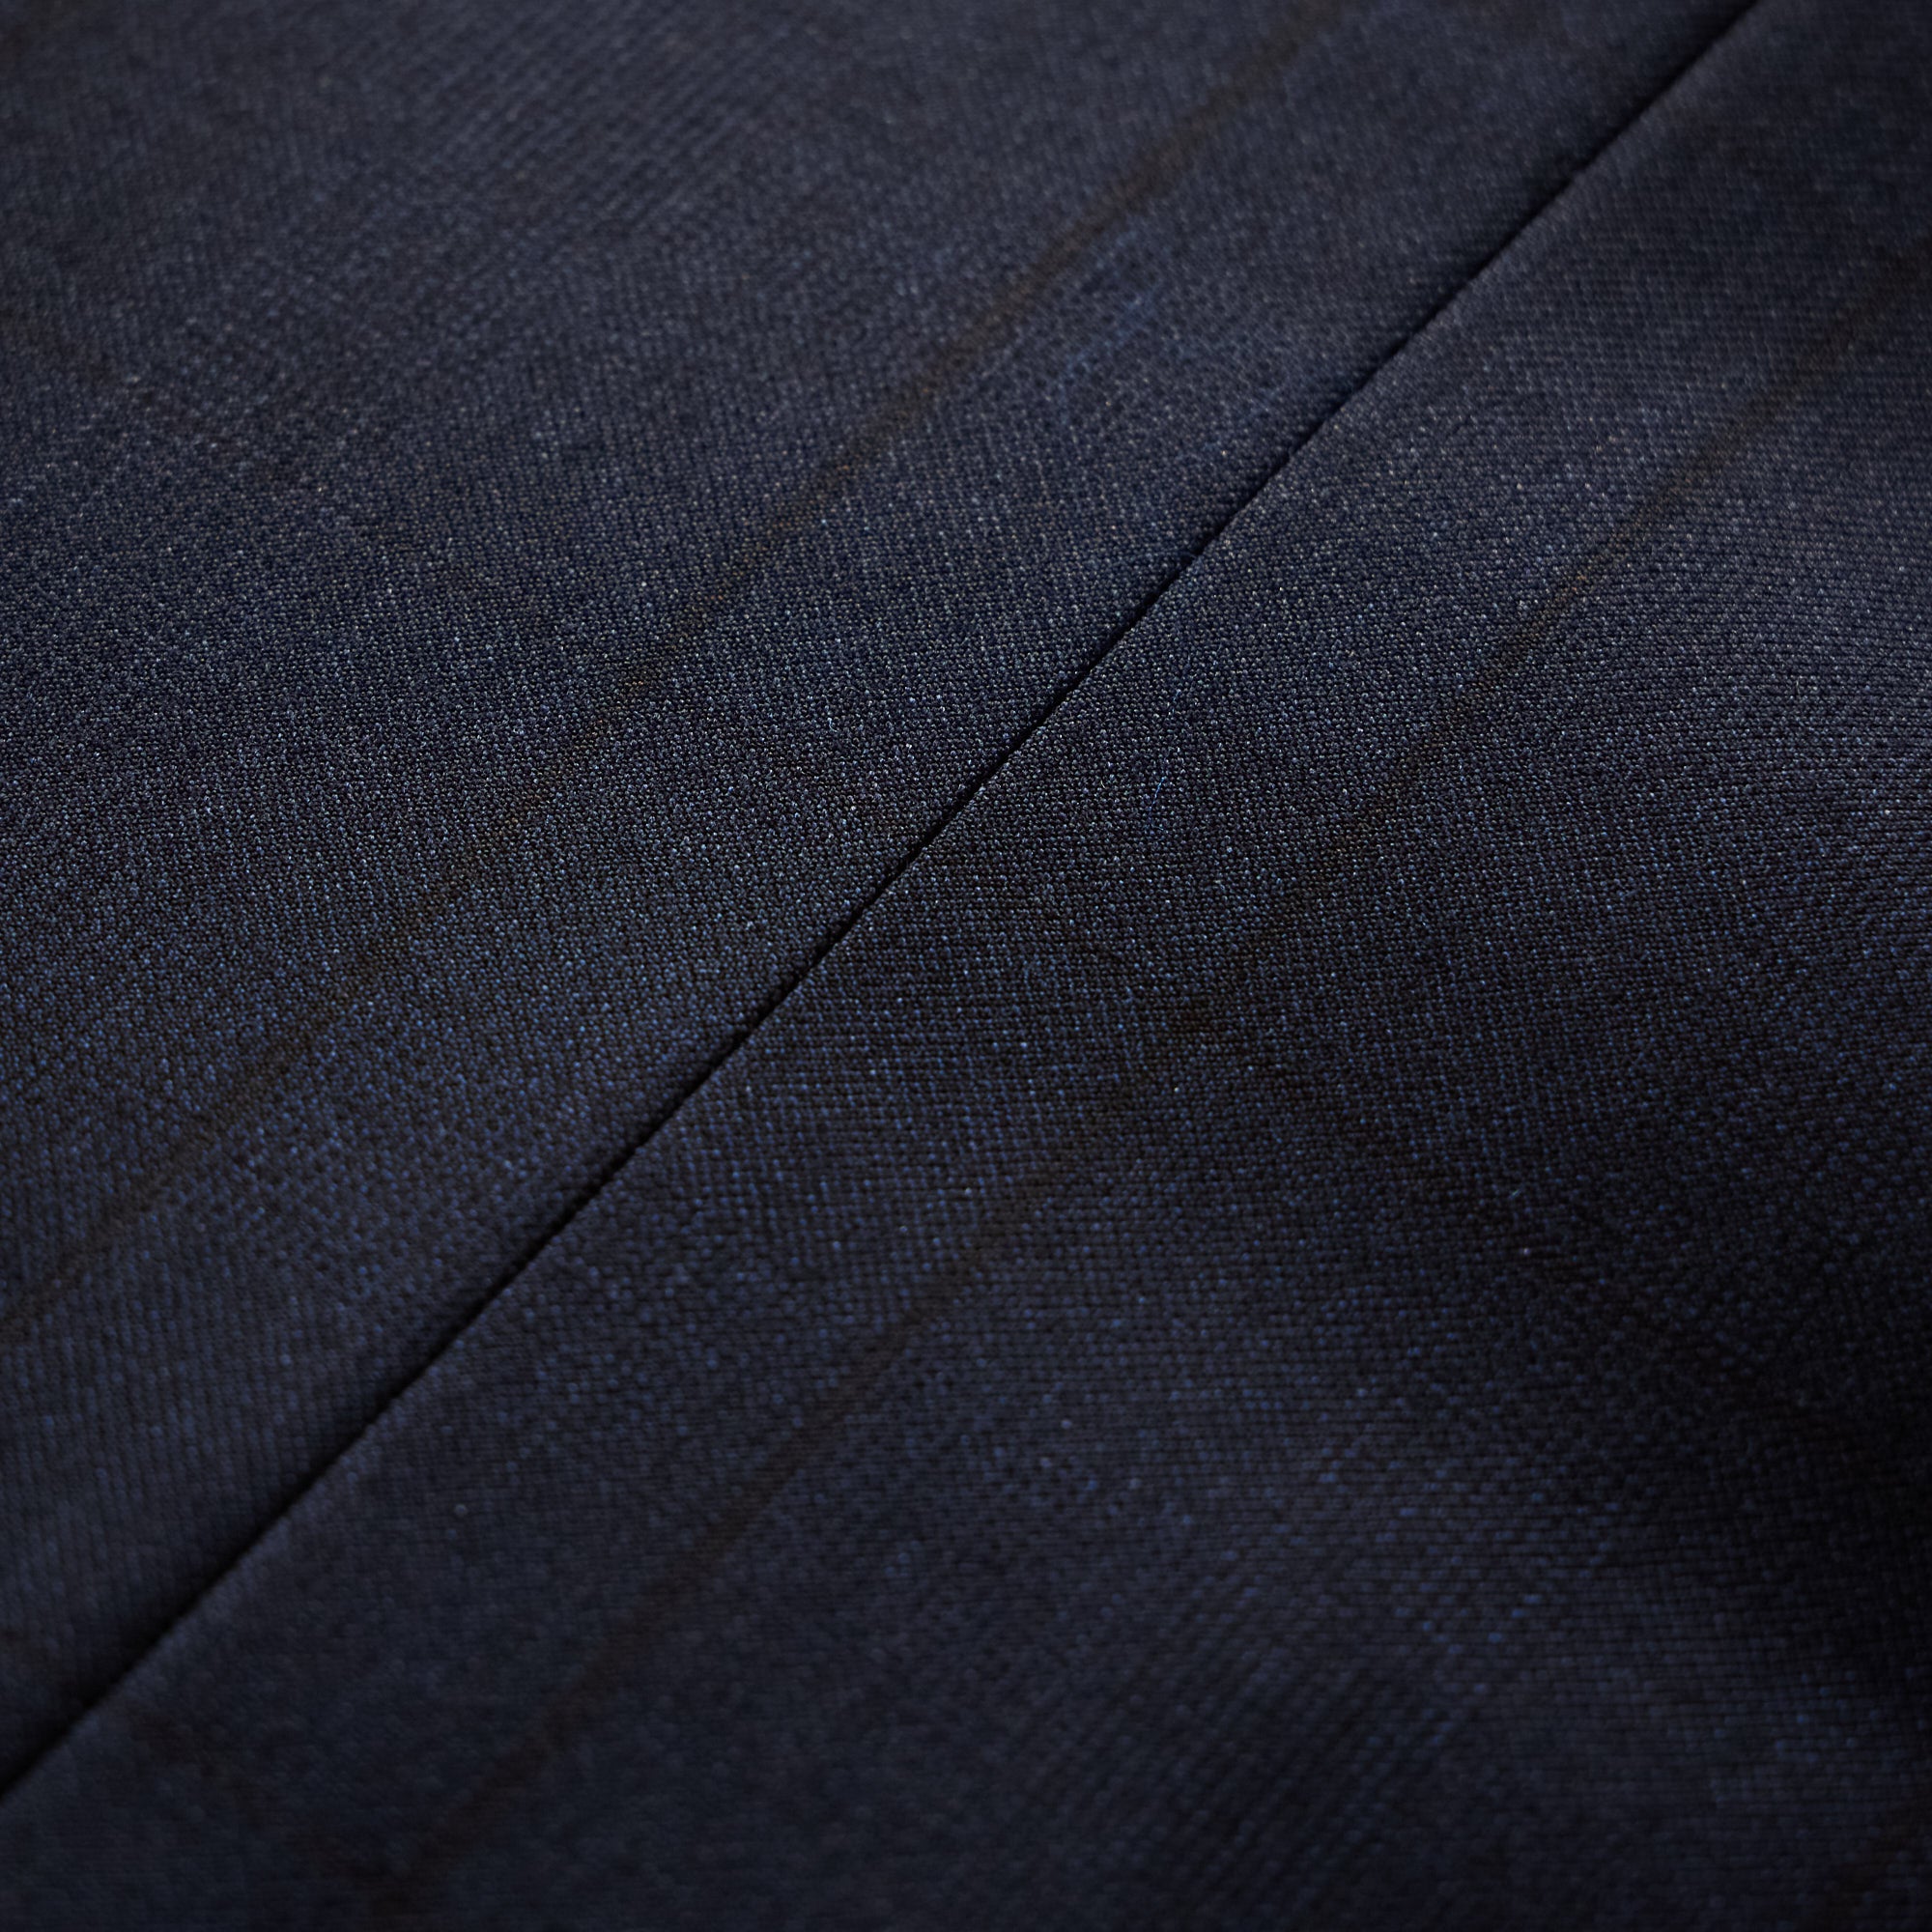 HENRY SARTORIAL X LATORRE Check Suit NAVY BLUE - Henry BucksSuits23AW240211 - NVBL - 48